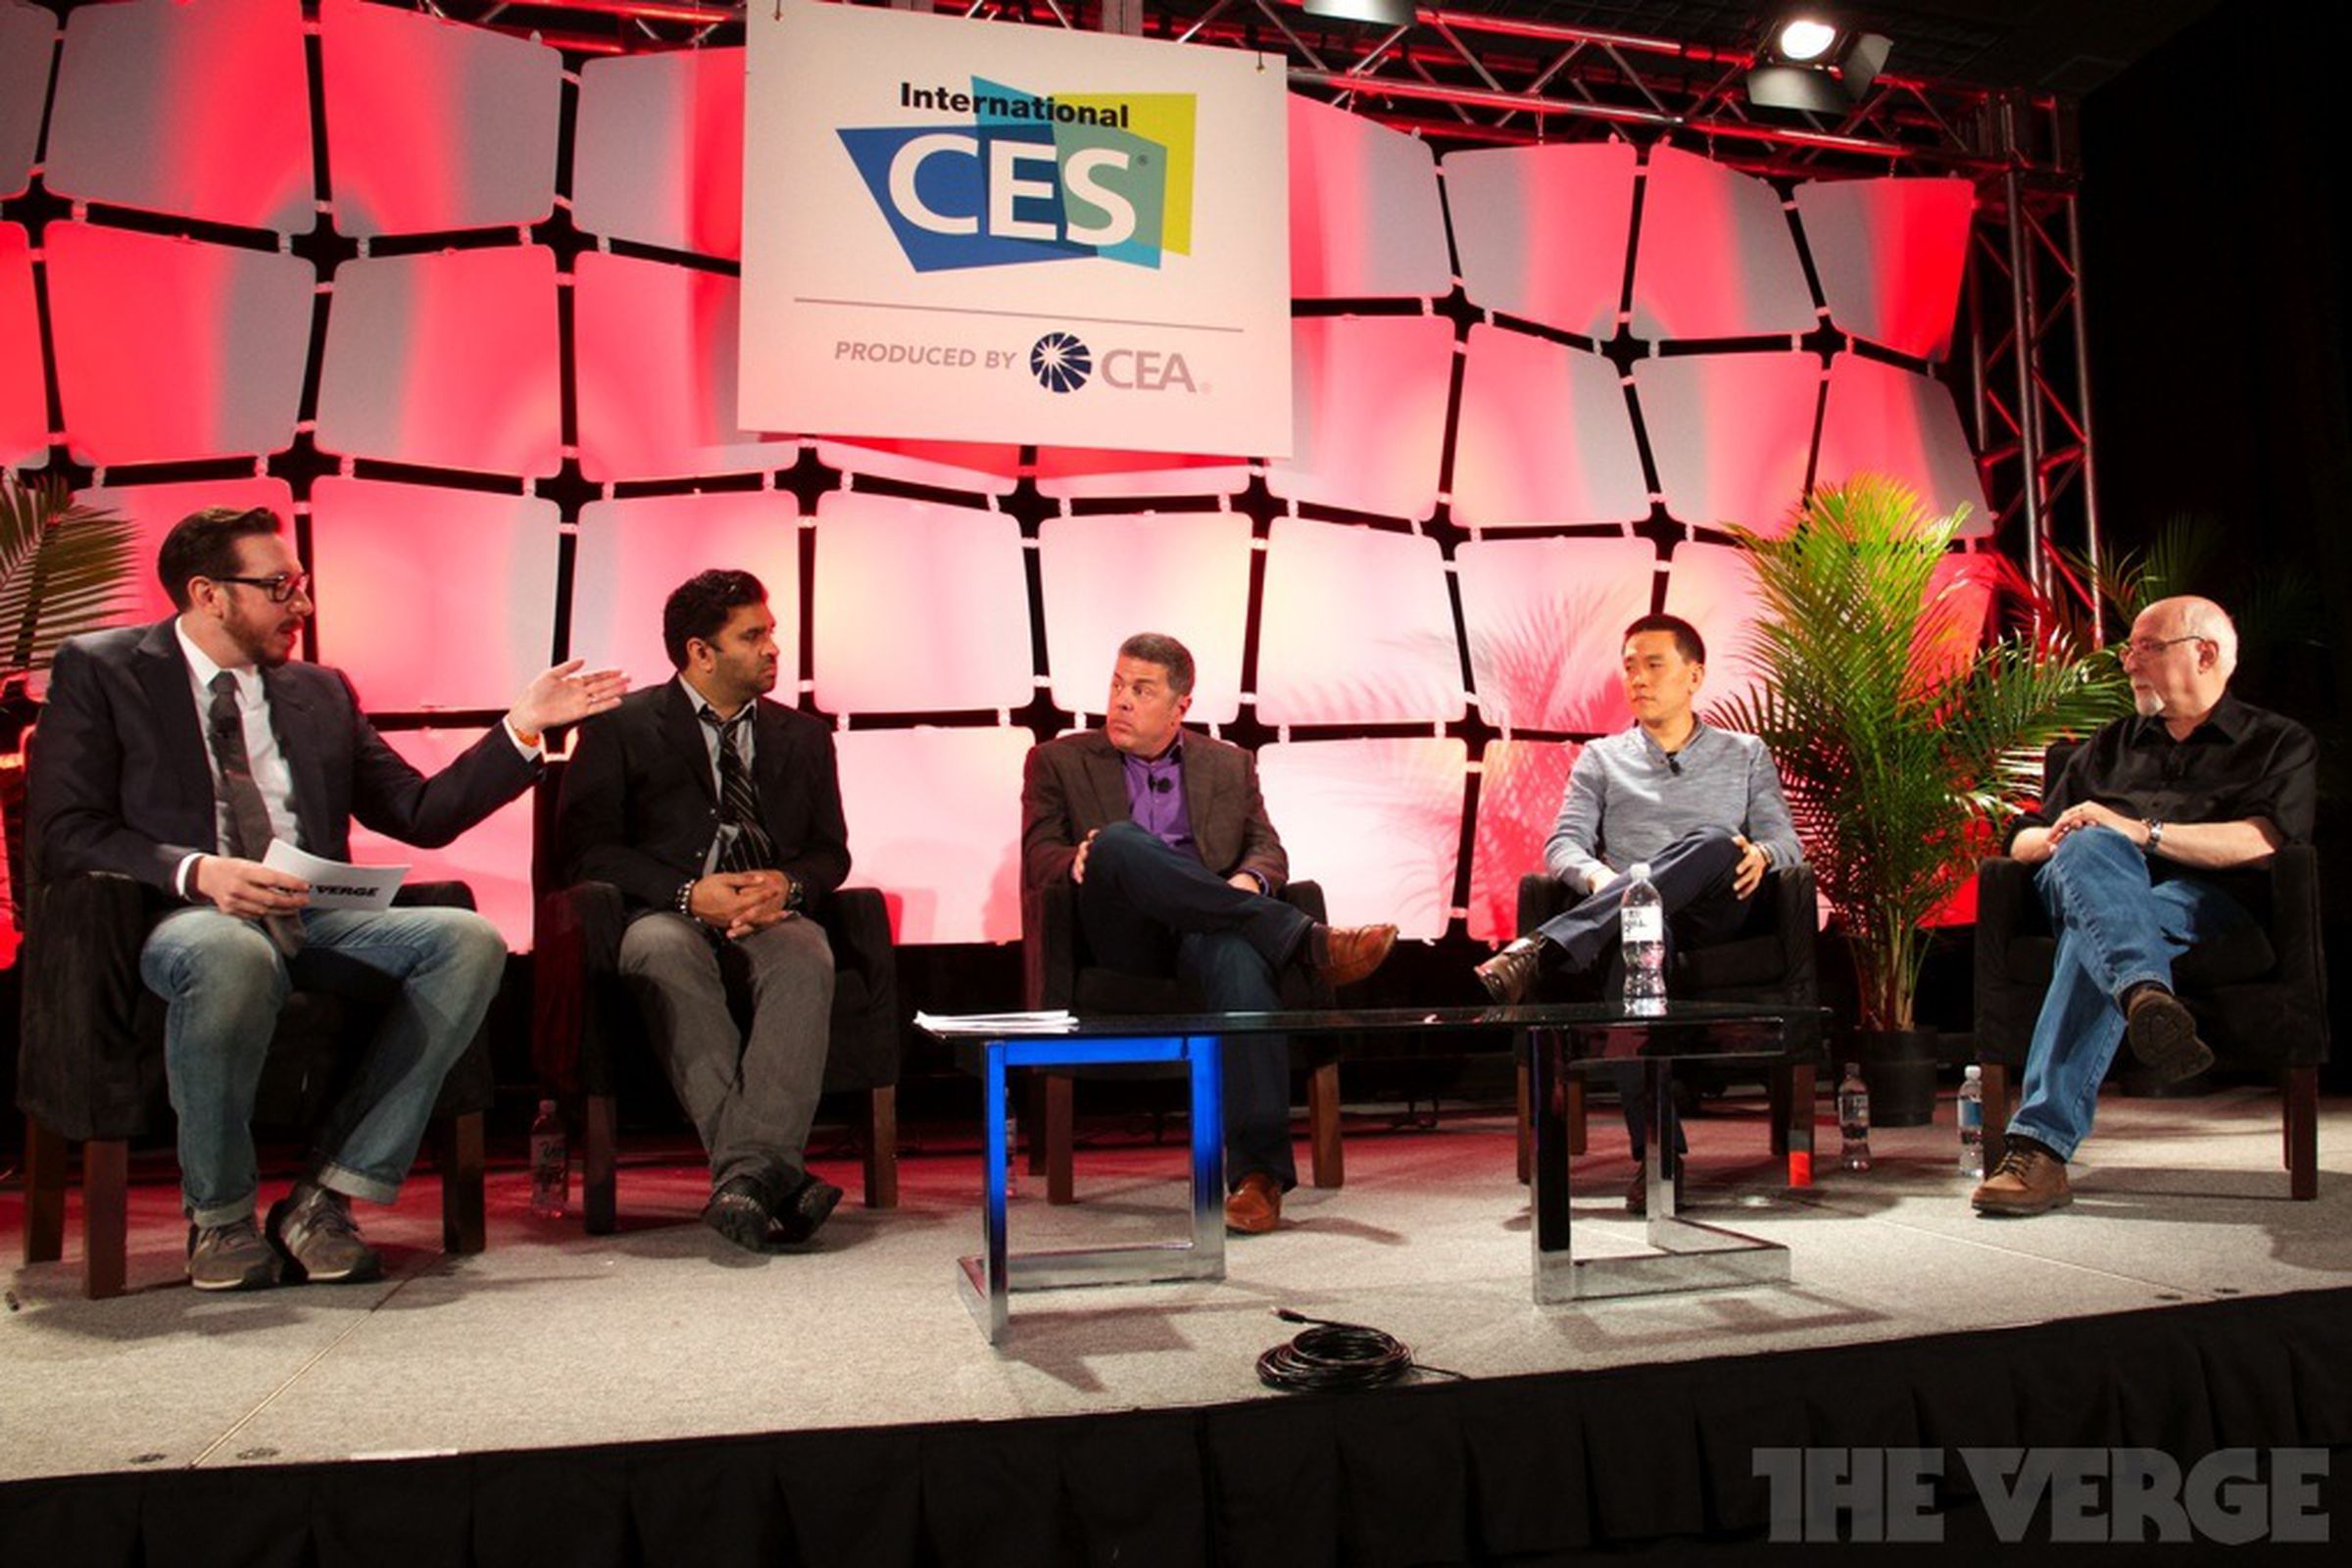 CES Supersession 2013